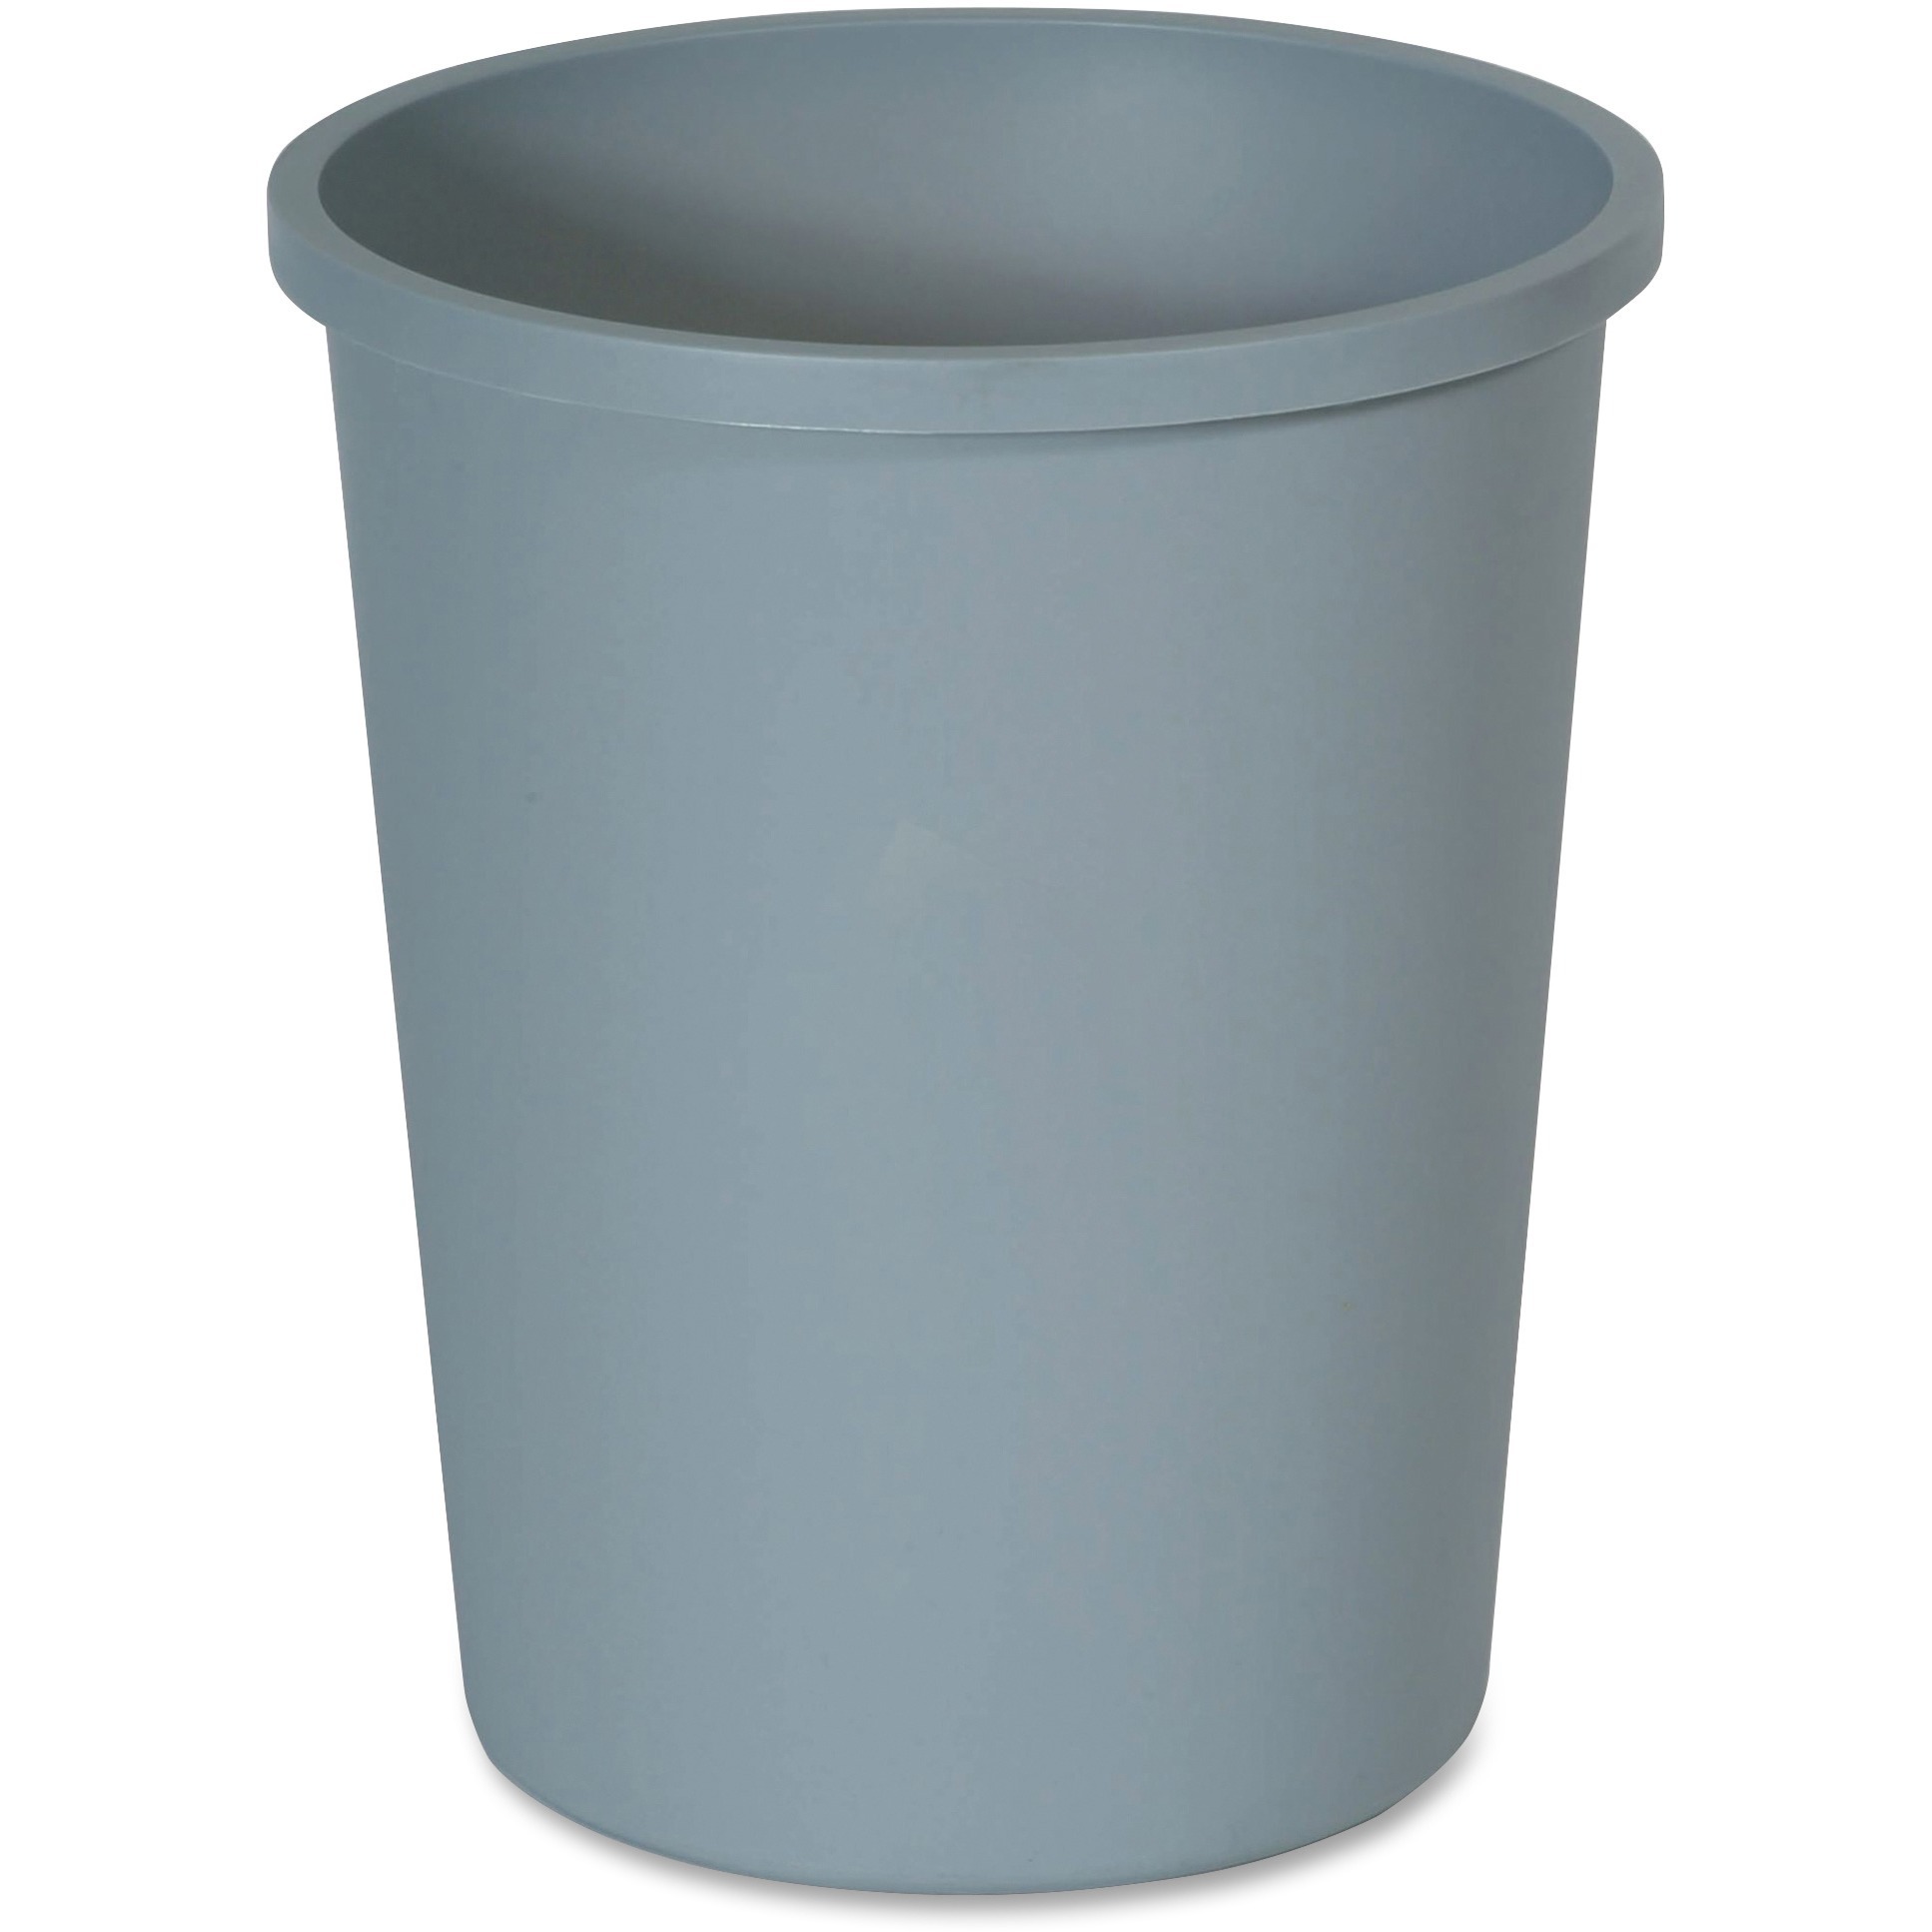 Untouchable Waste Container, Round, Plastic, 11gal, Gray